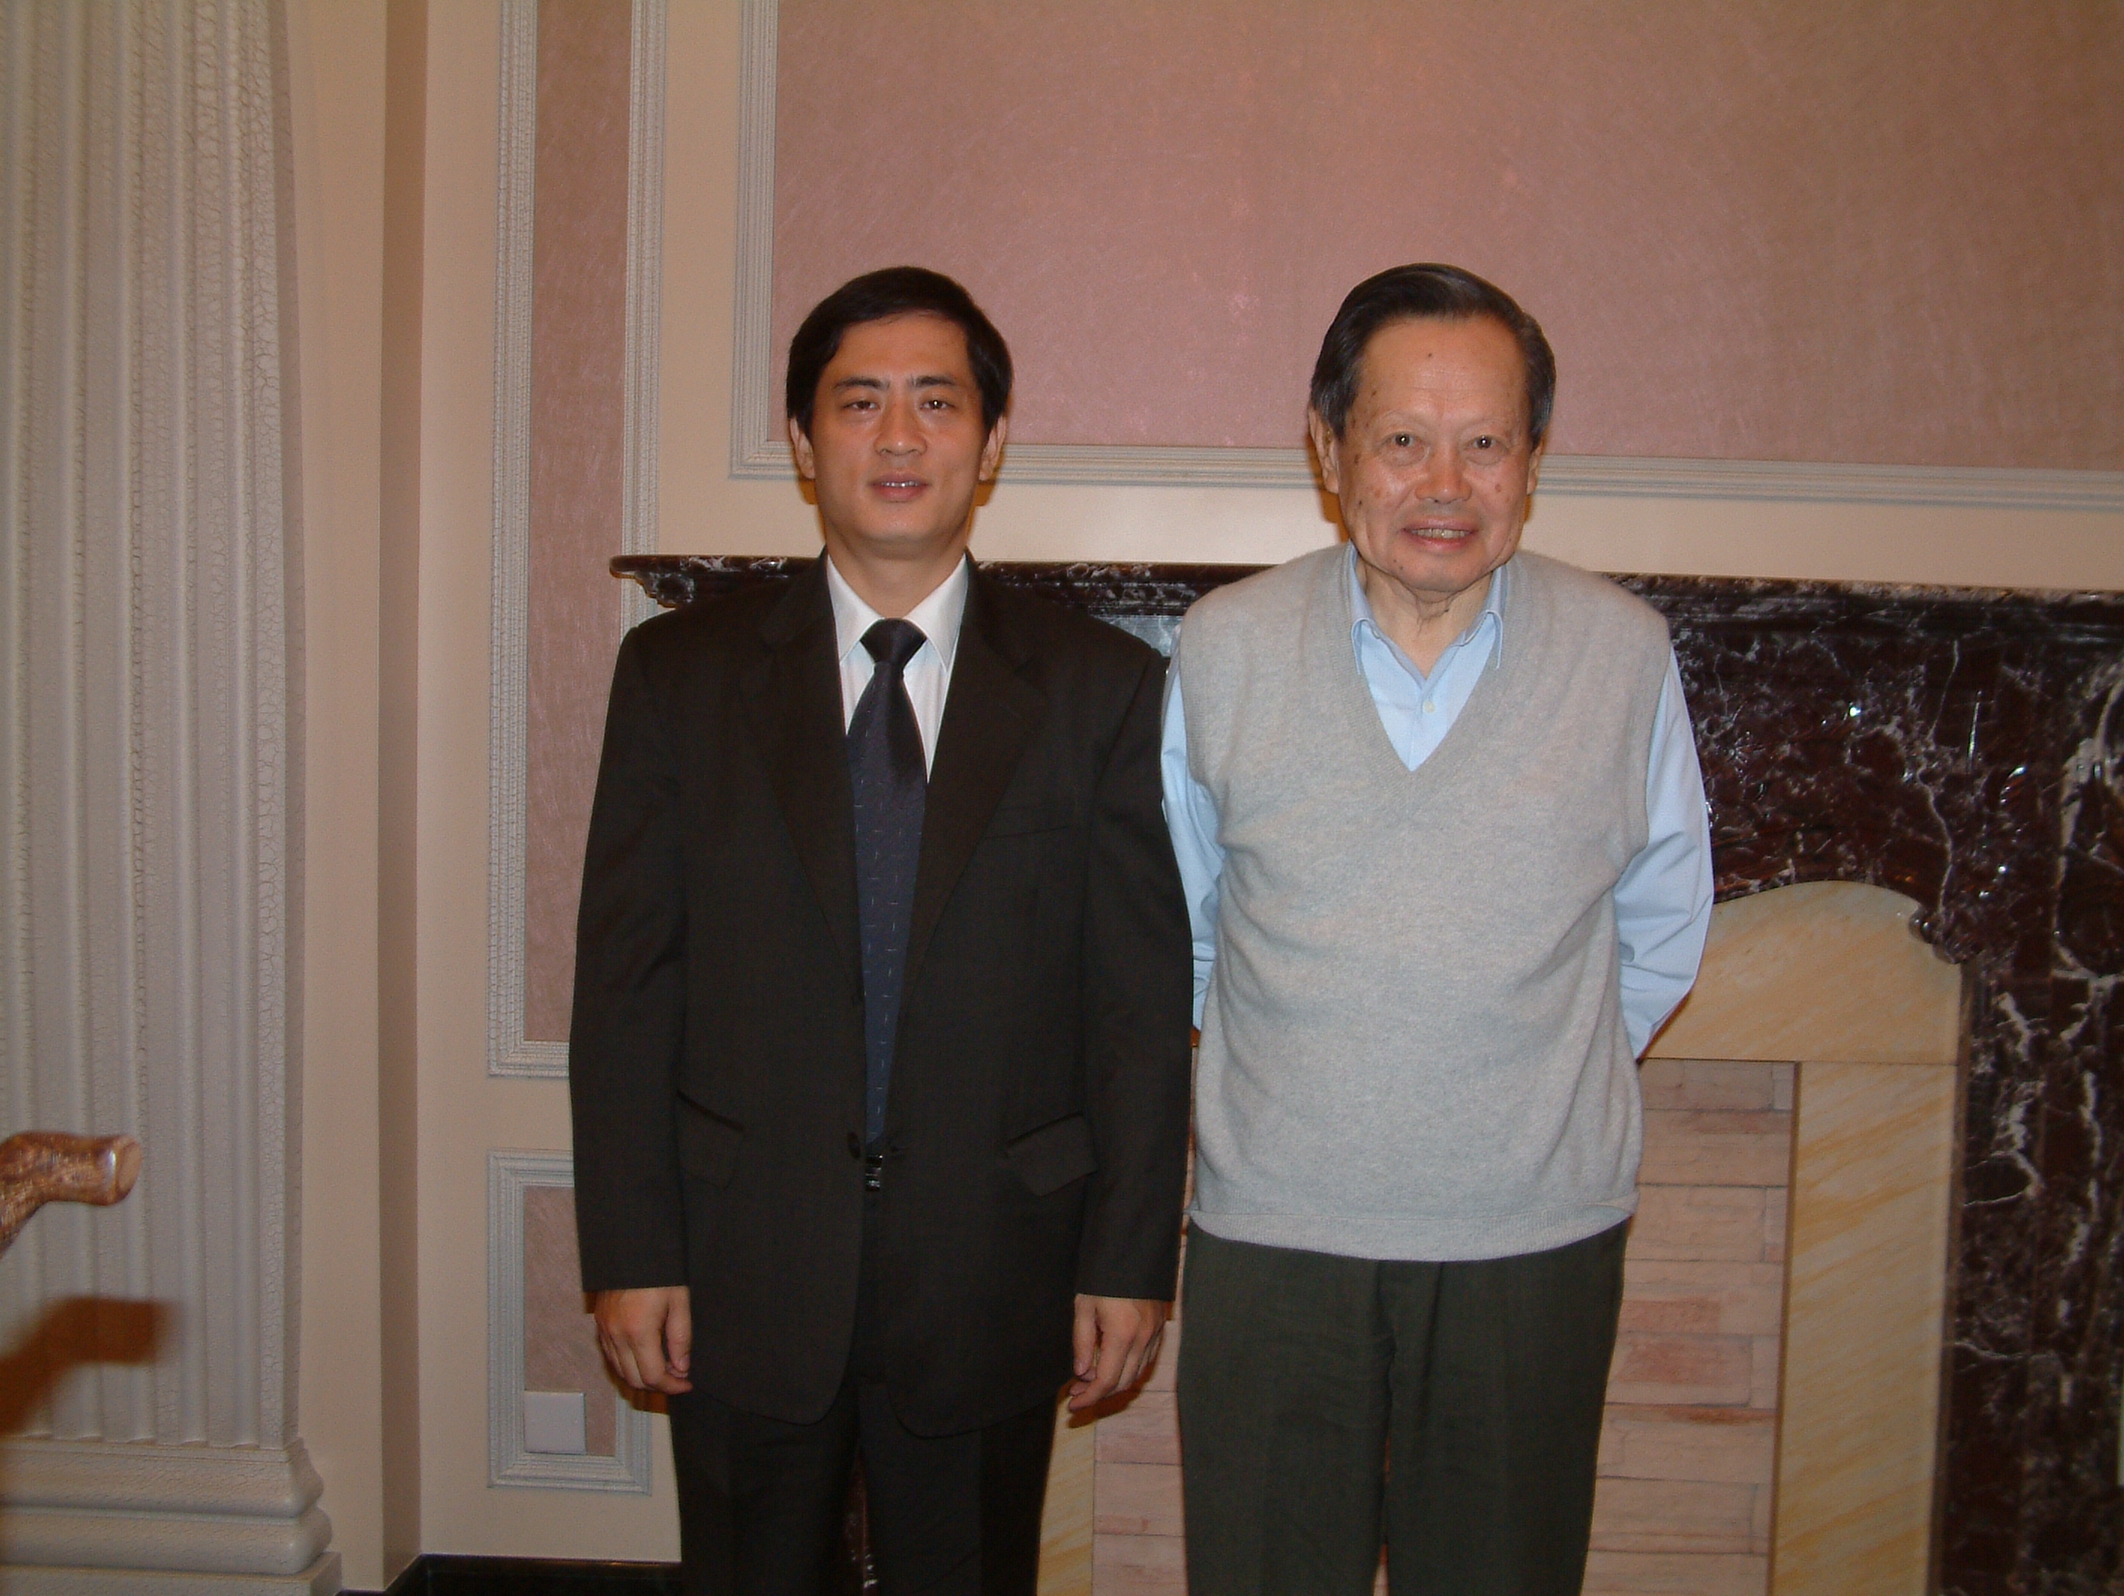 A photo with poet Zhenning Yang